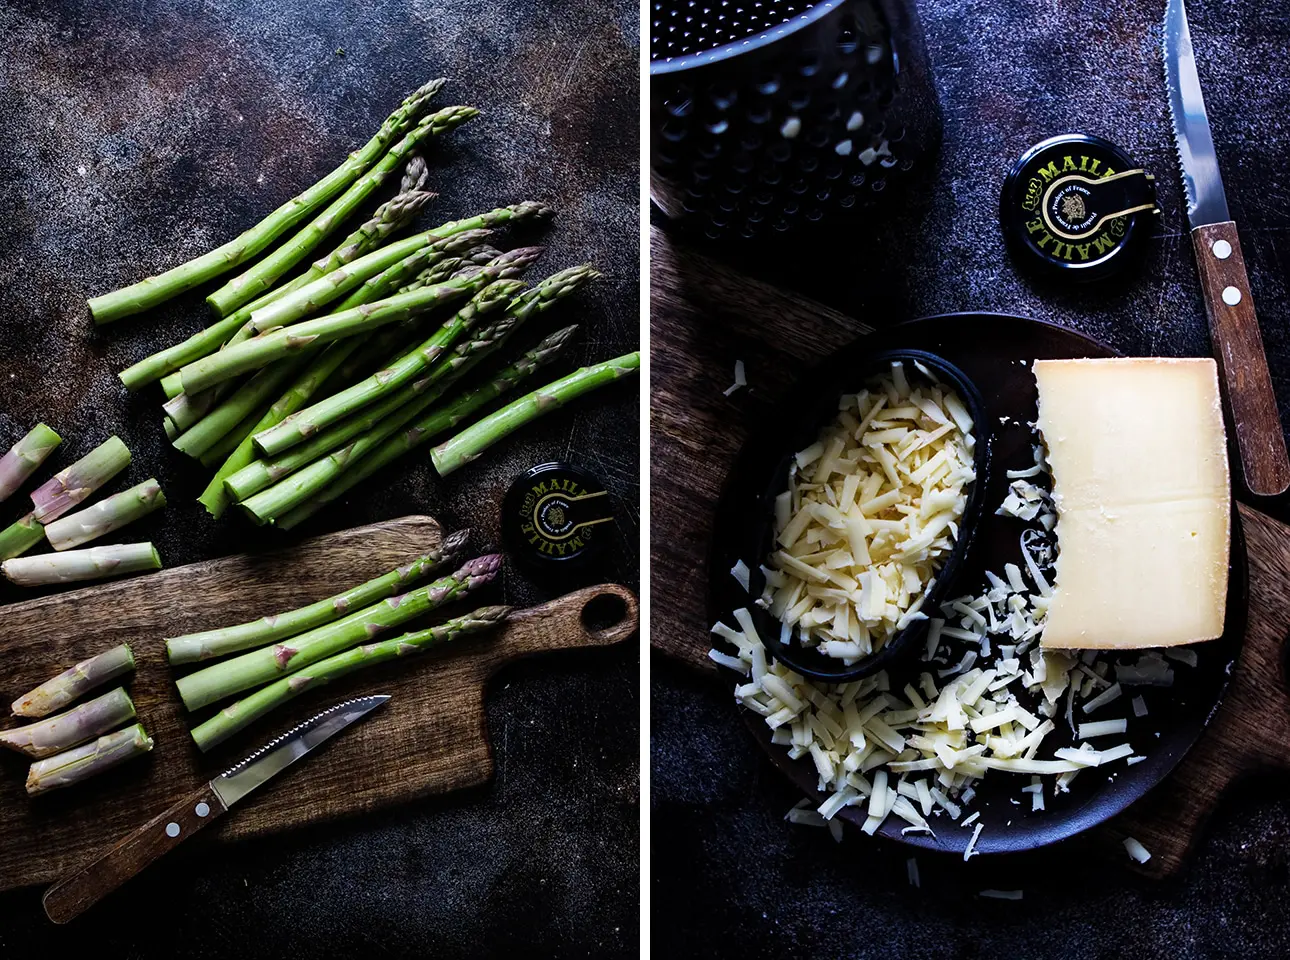 Collage: Asparagus Spears Being Trimmed on a Board Next to Grated Gruyere Cheese